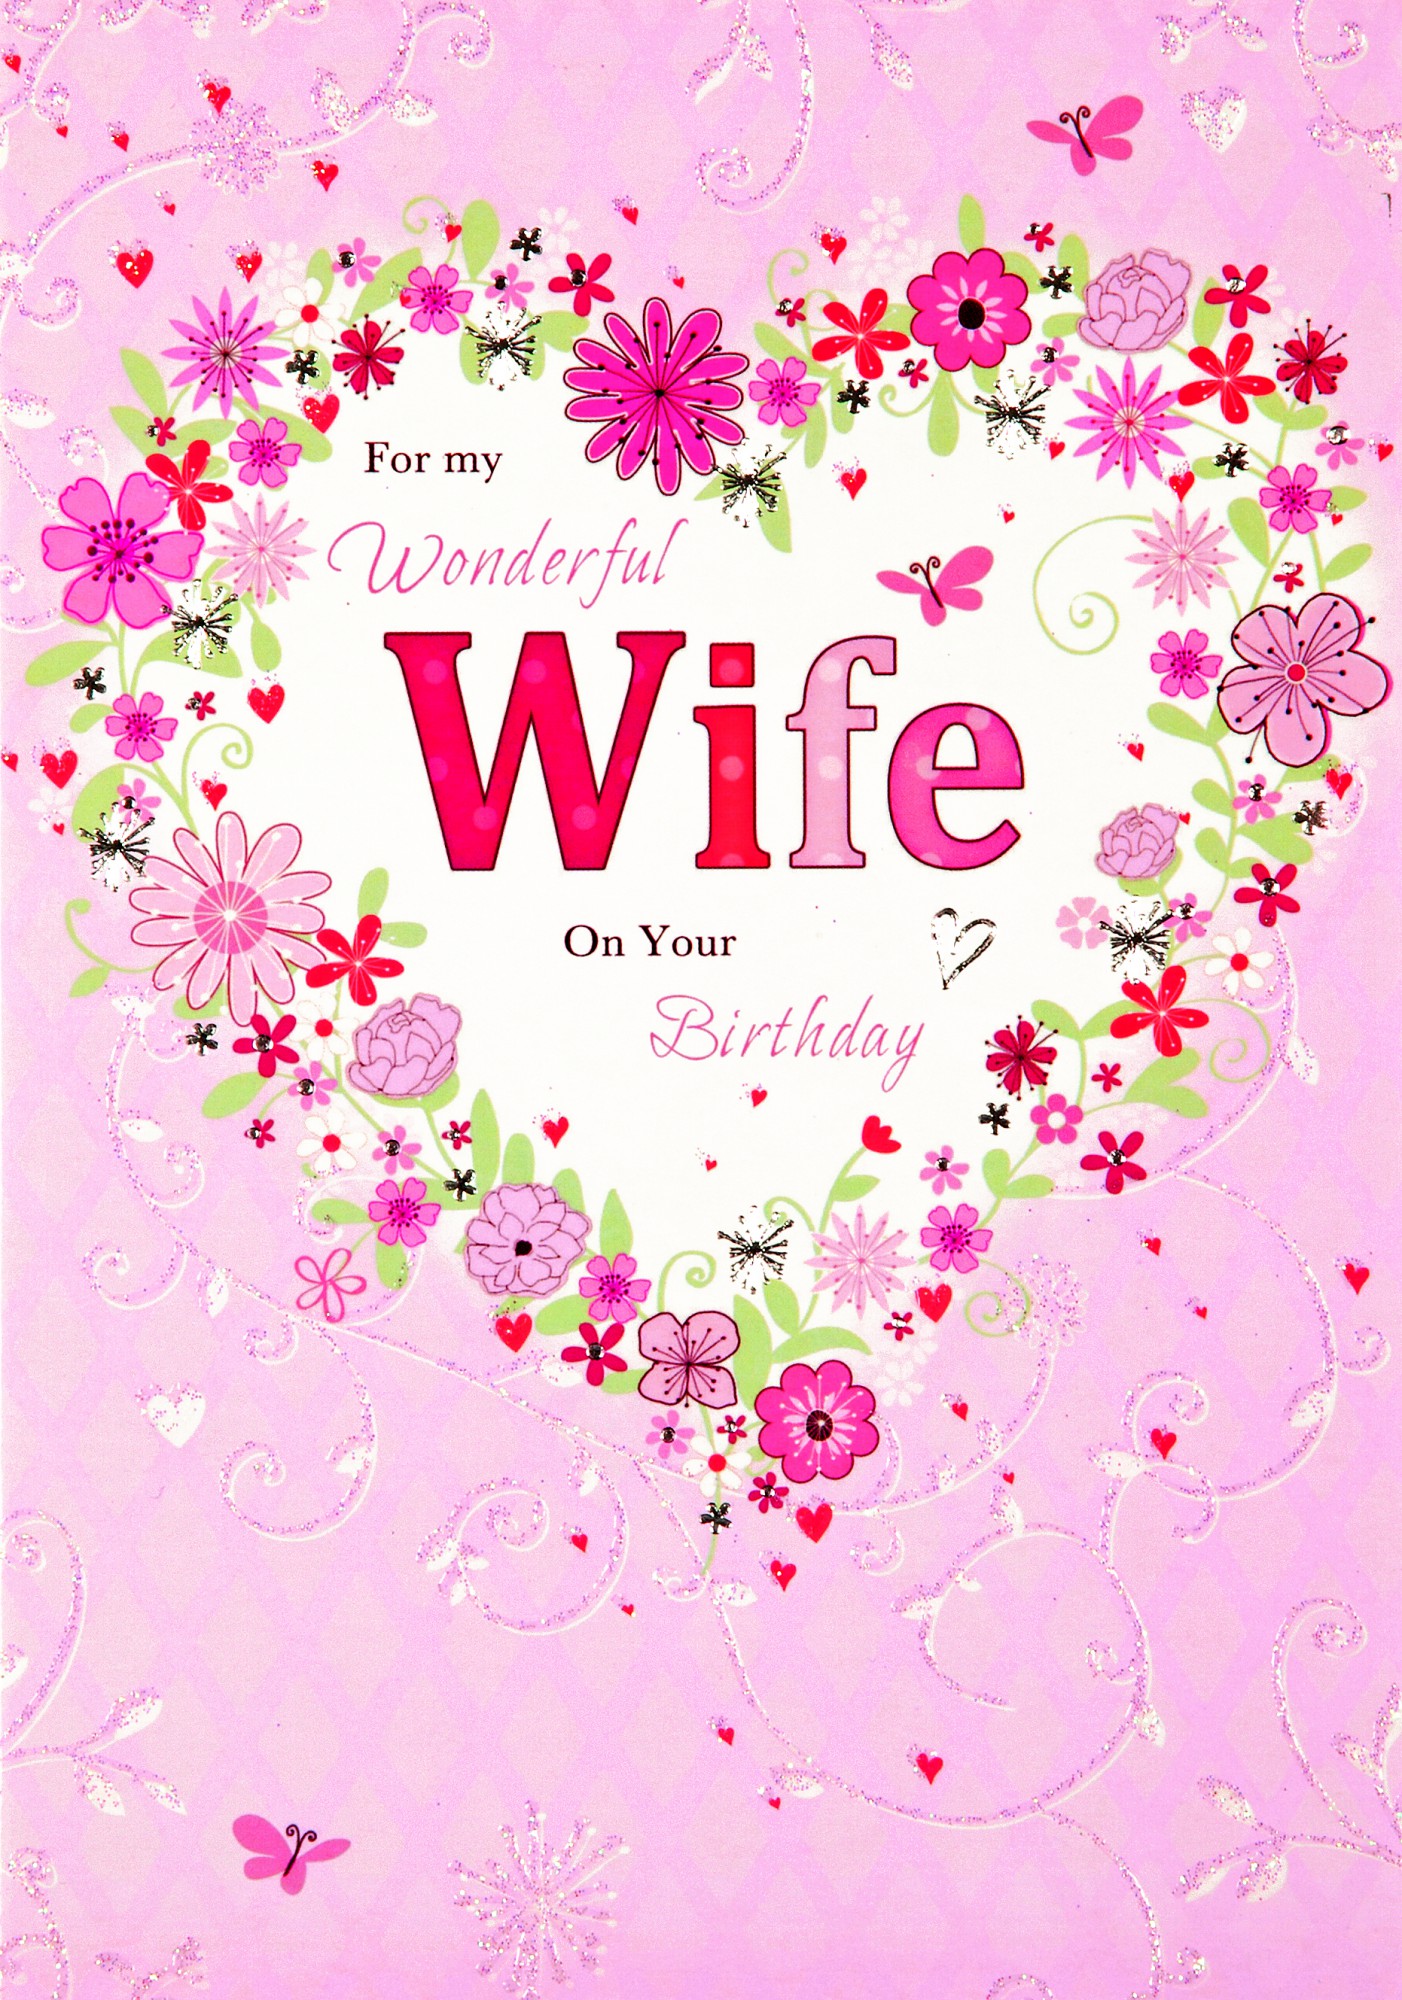 wife-birthday-greeting-cards-lp-wholesale